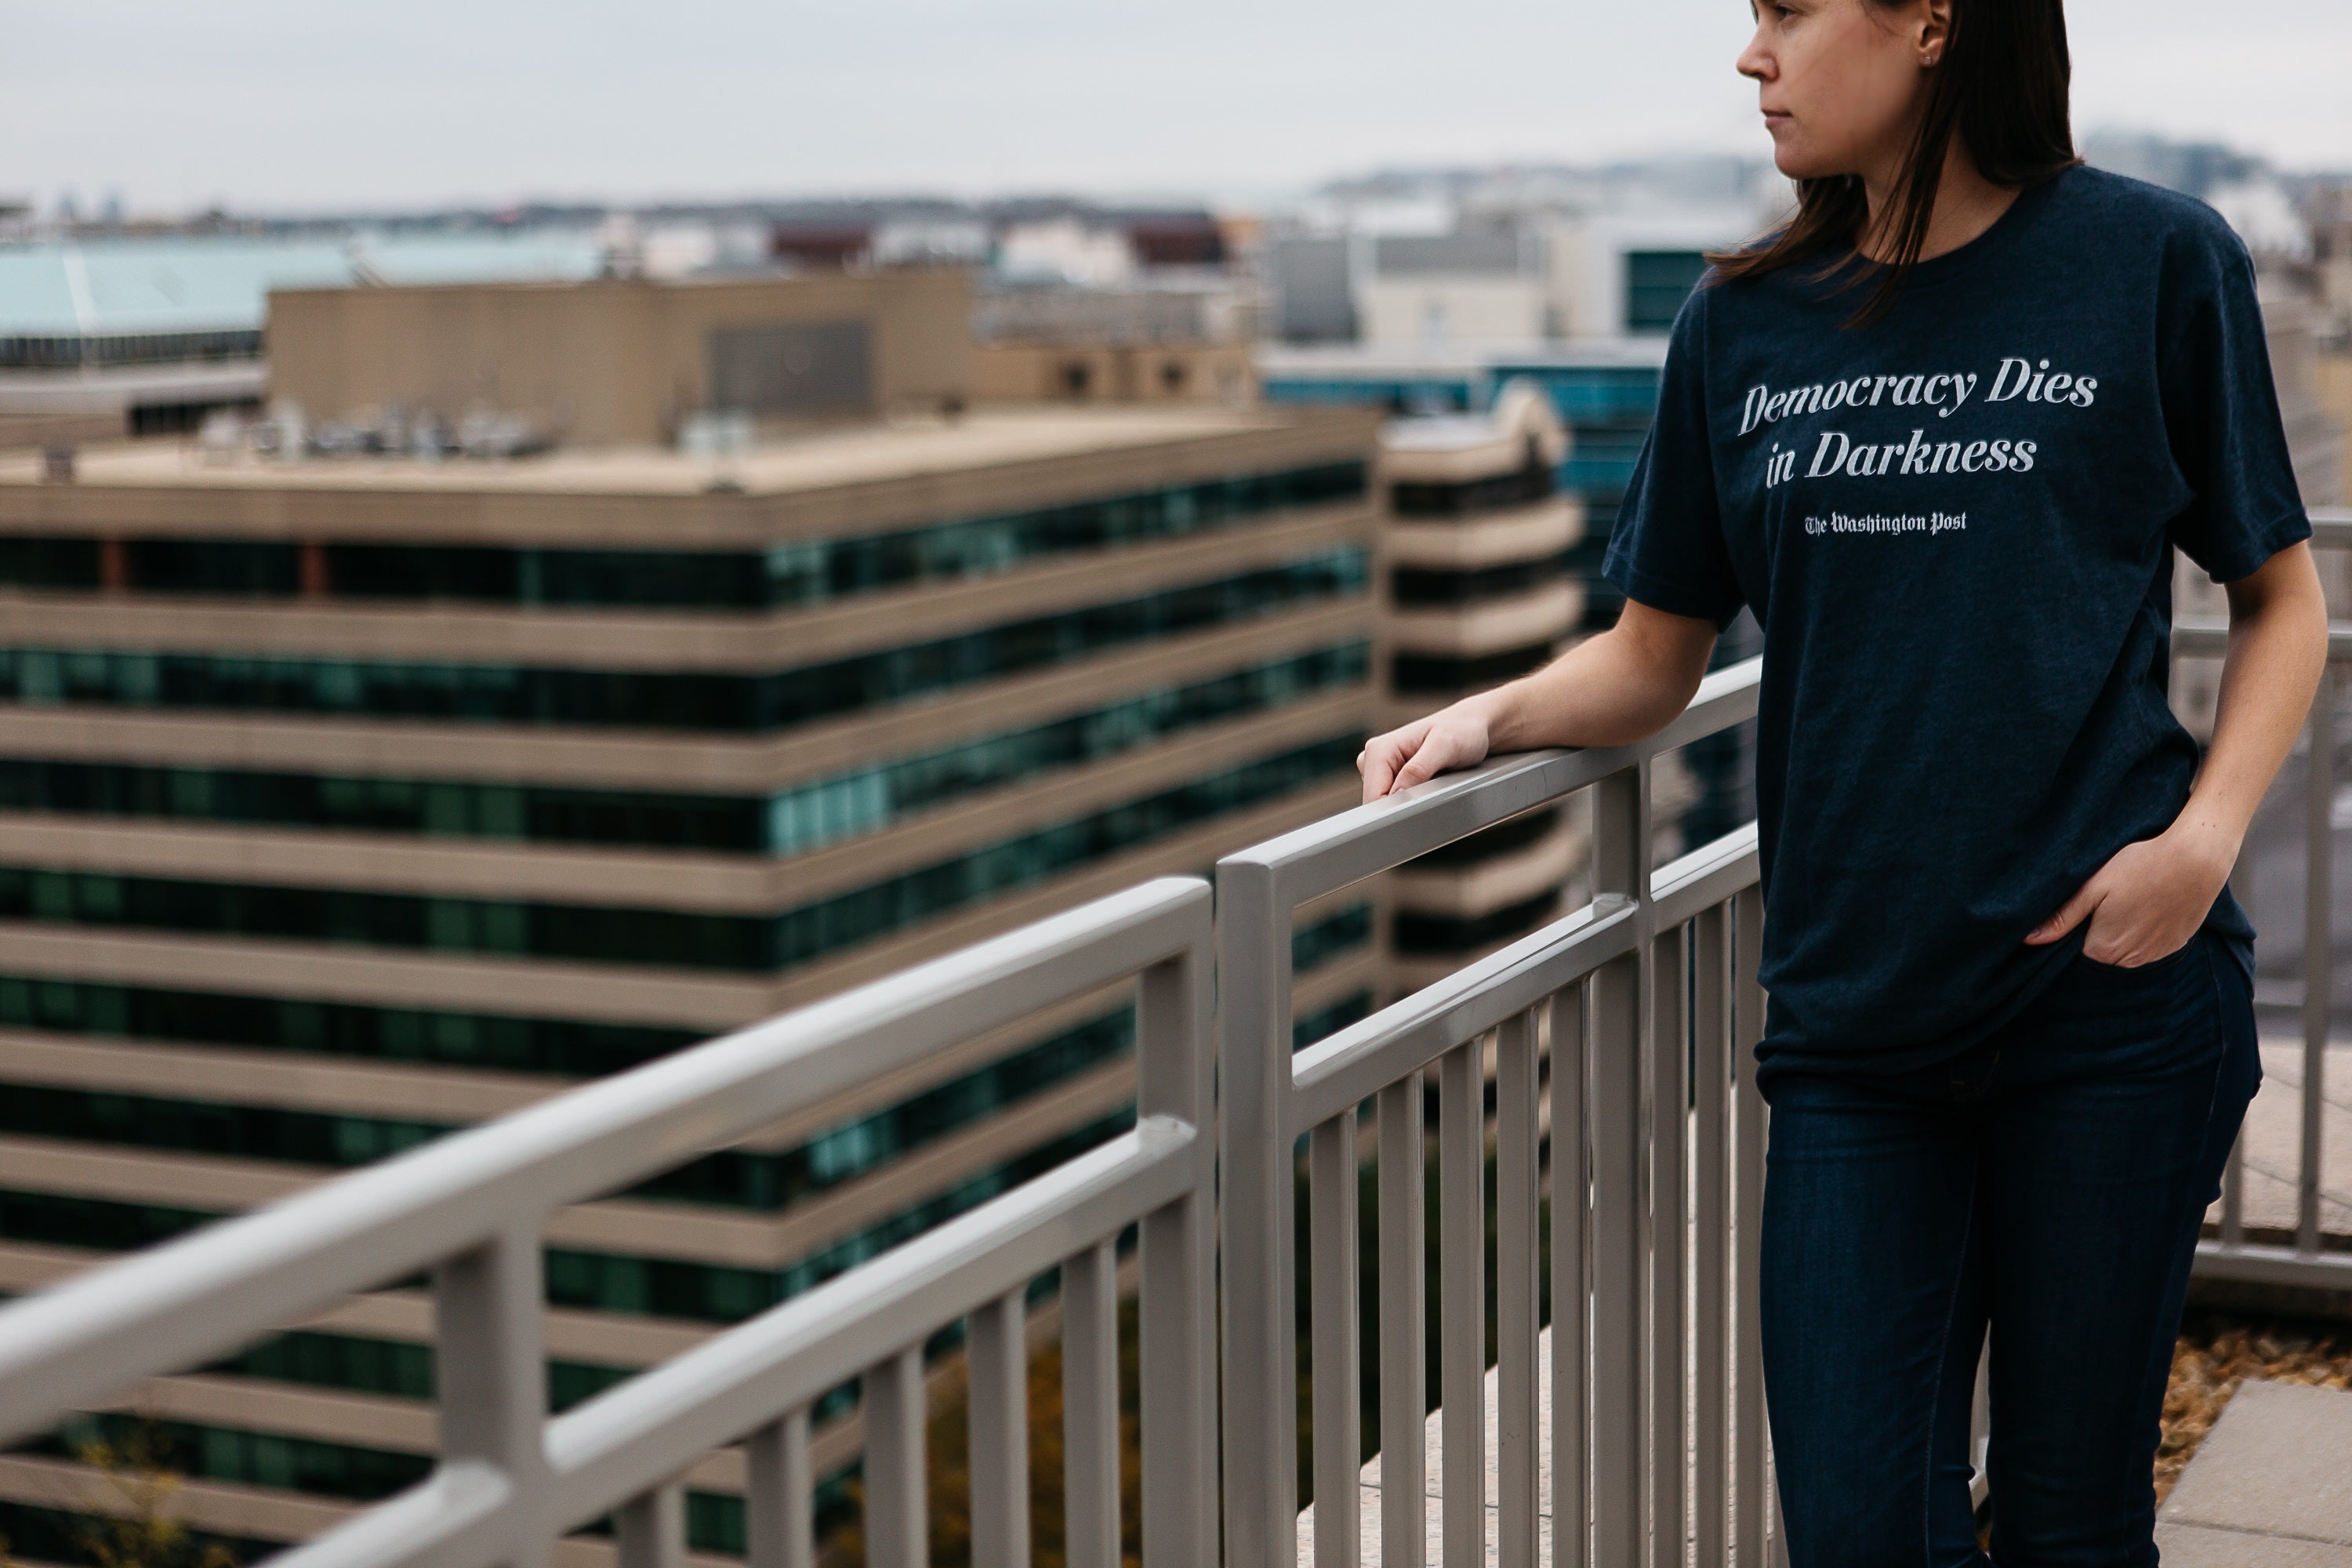 Model wearing Democracy Dies in Darkness T-shirt in navy with white lettering